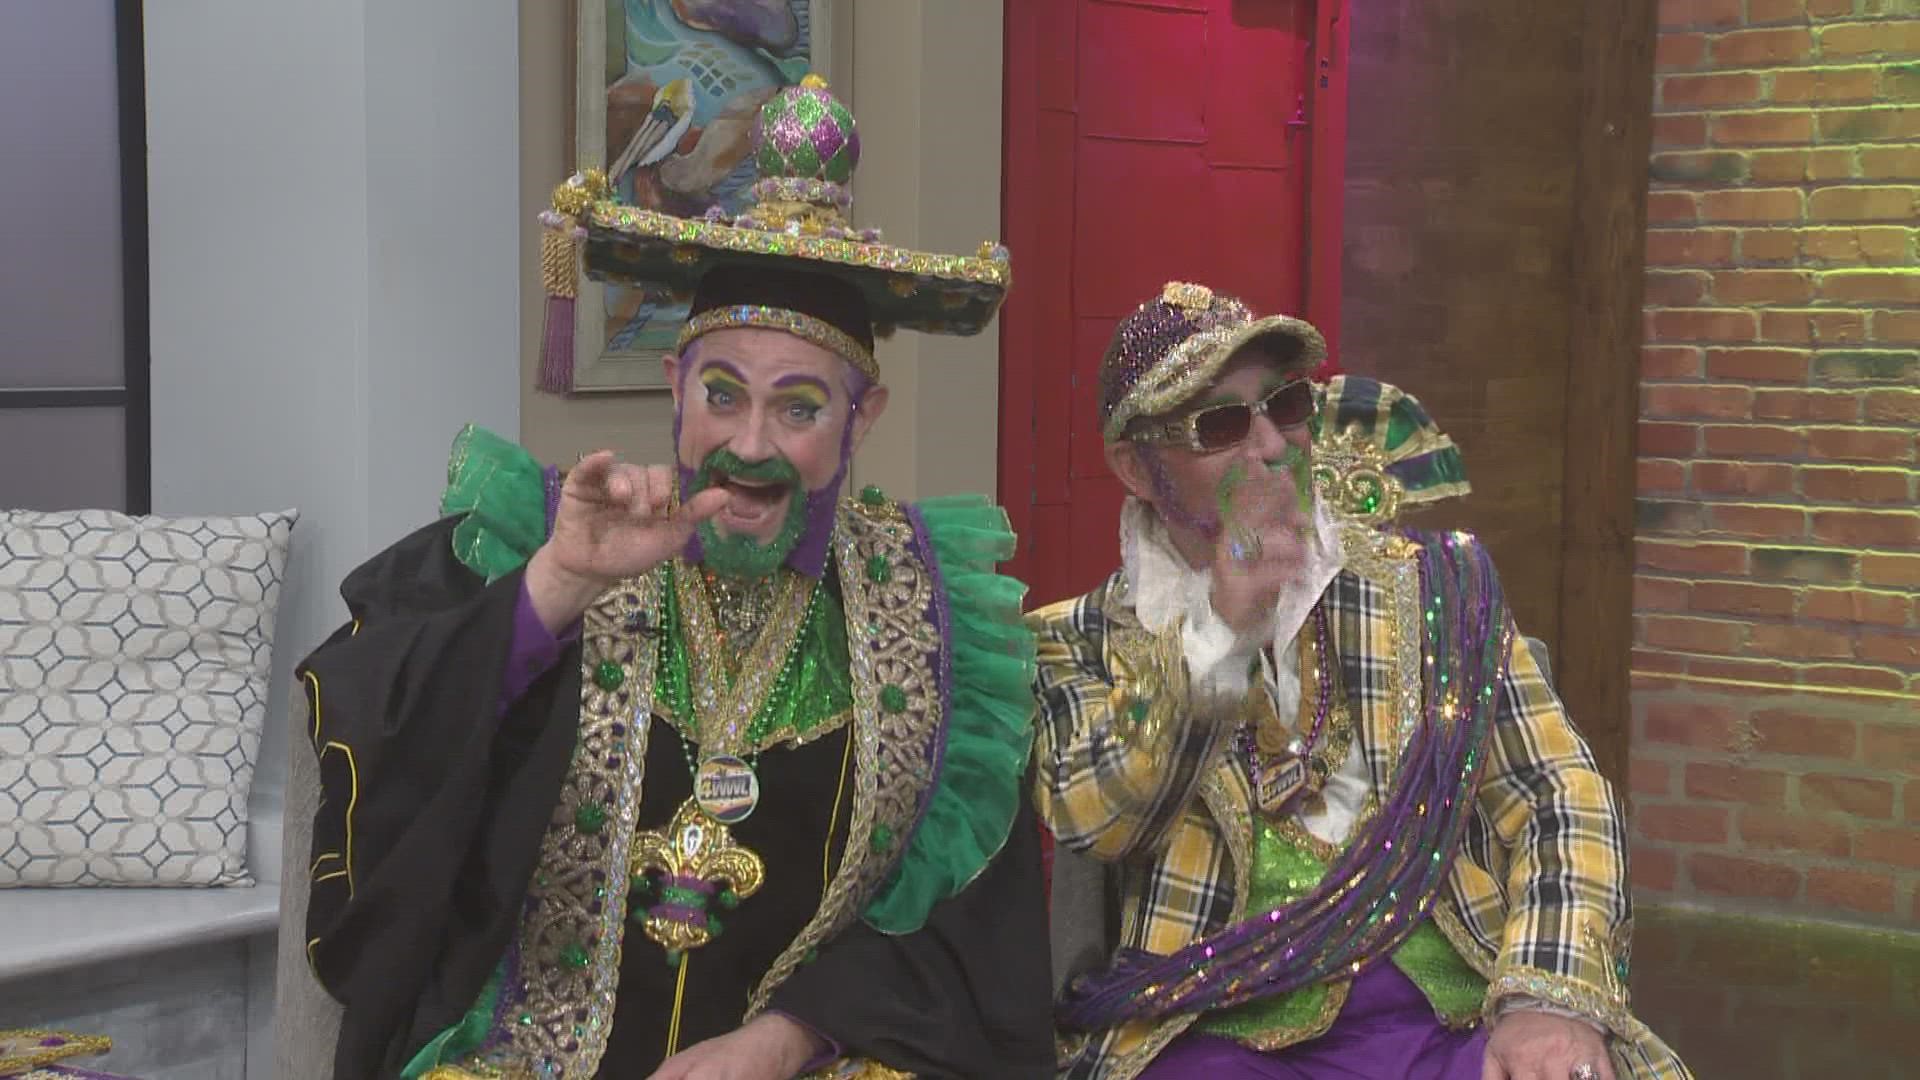 Professor Carl Nivale & The Grand Marshal get you ready for Mardi Gras ...